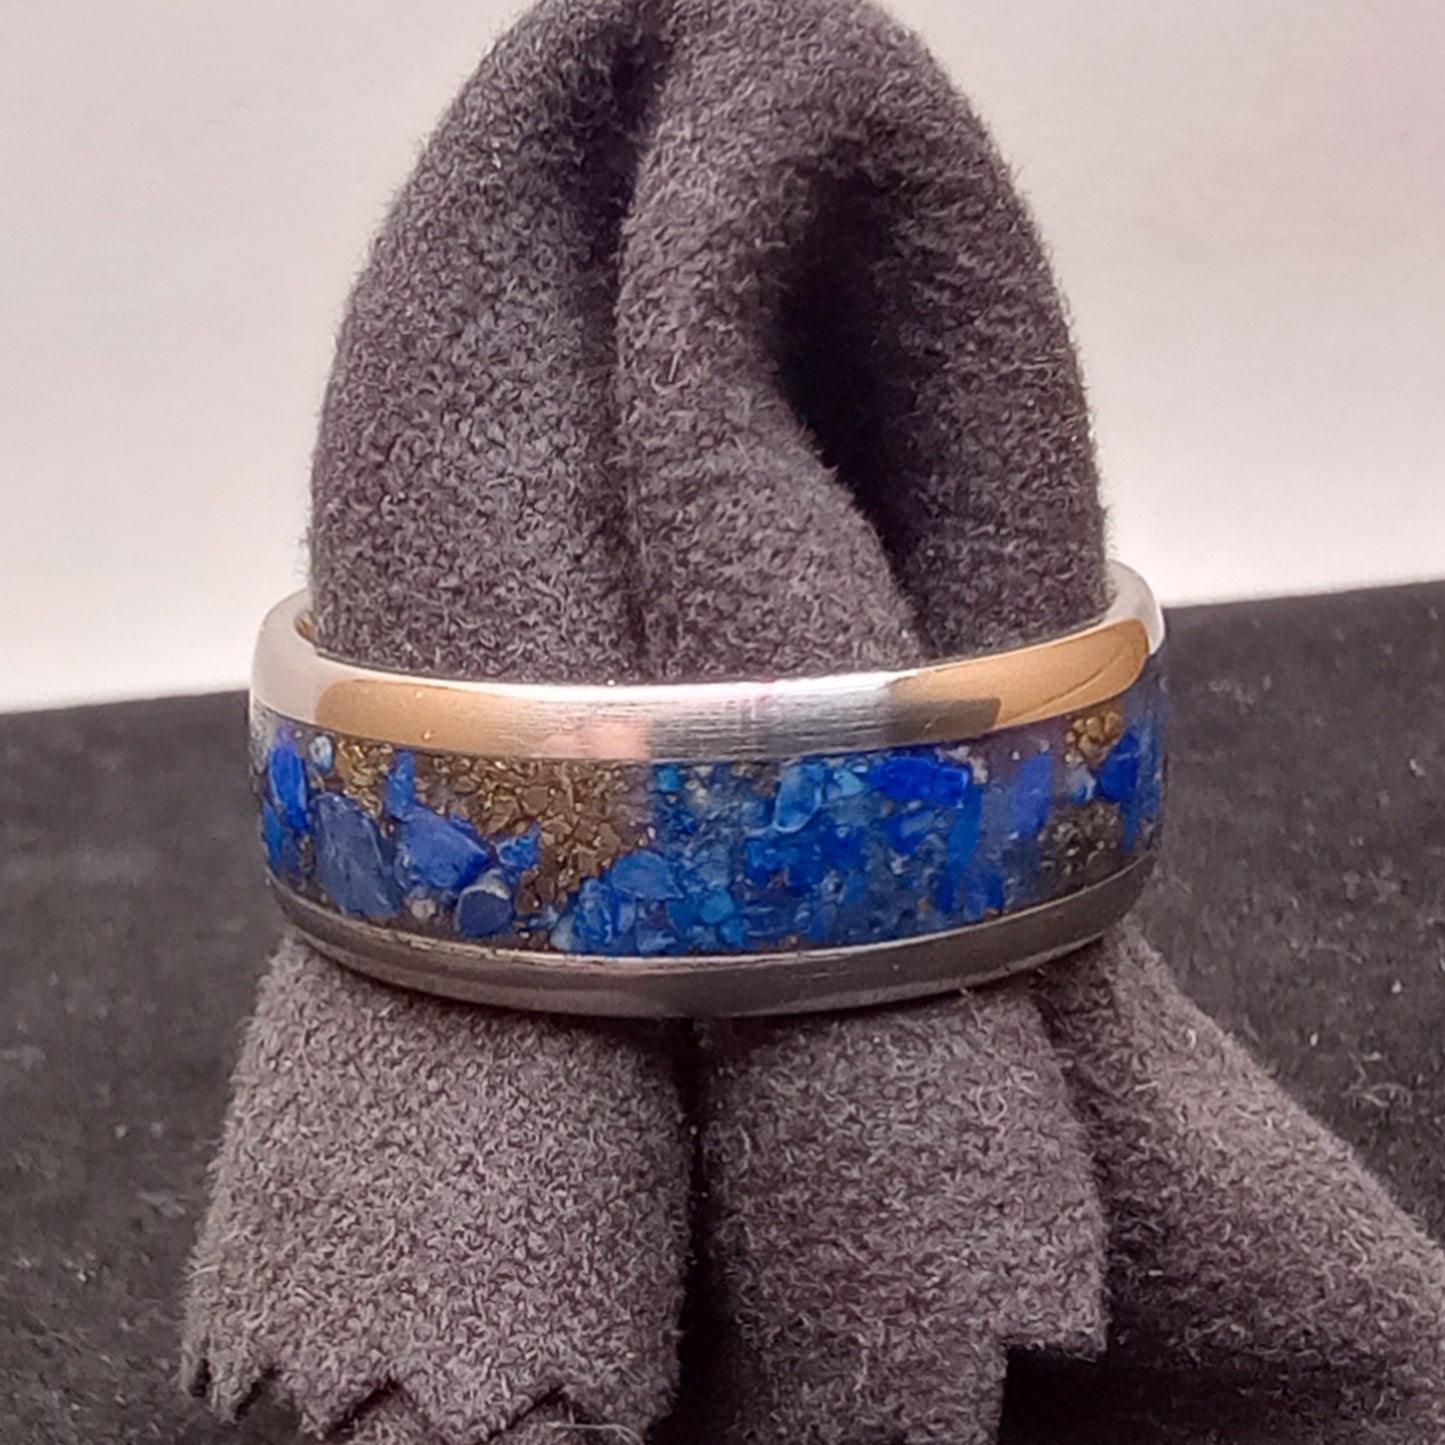 Lapis Lazuli and Pyrite Stainless Steel Rings